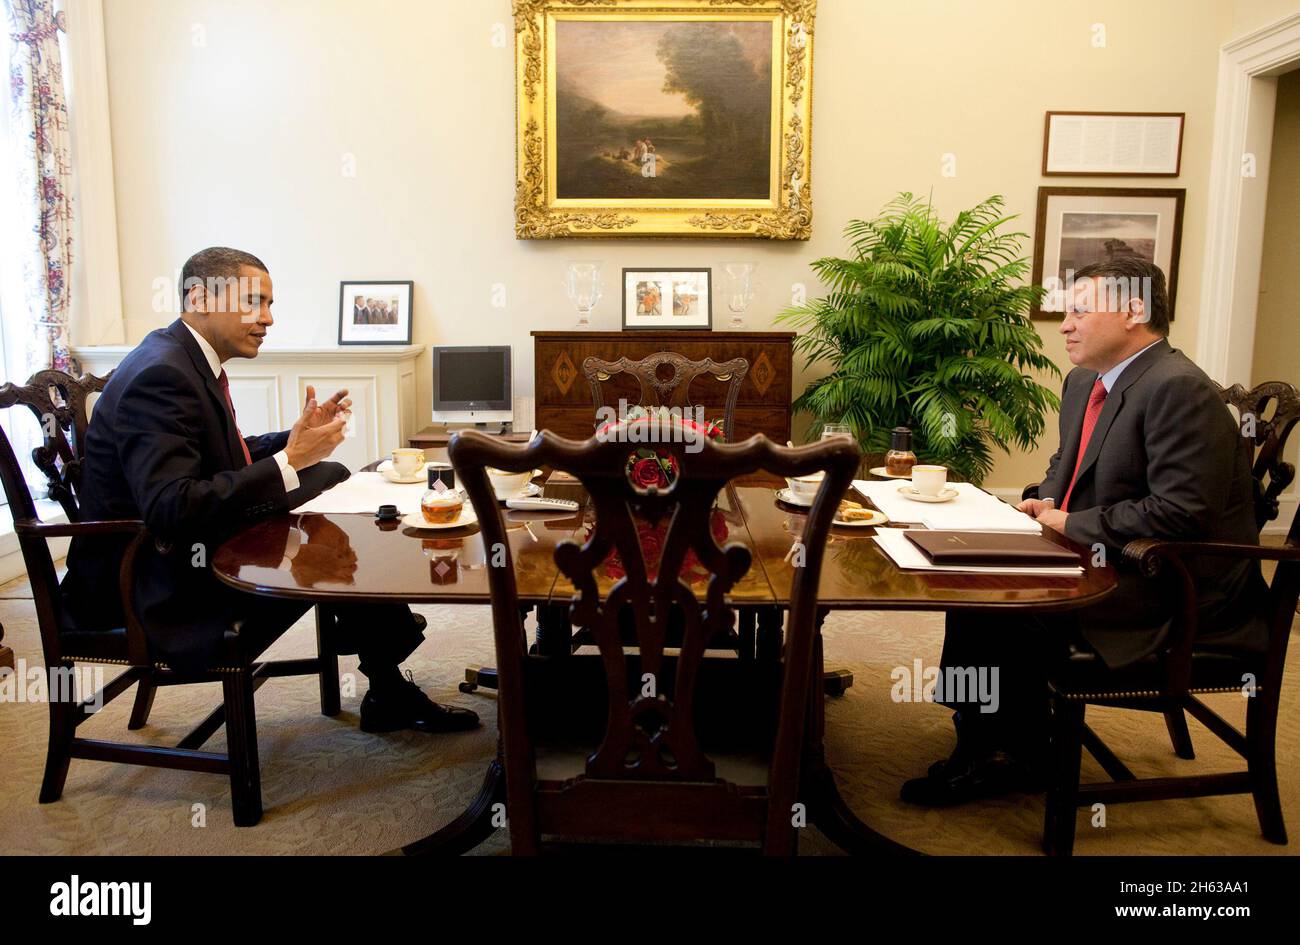 Obama Oval meeting with King of Jordan ca. 2009 Stock Photo